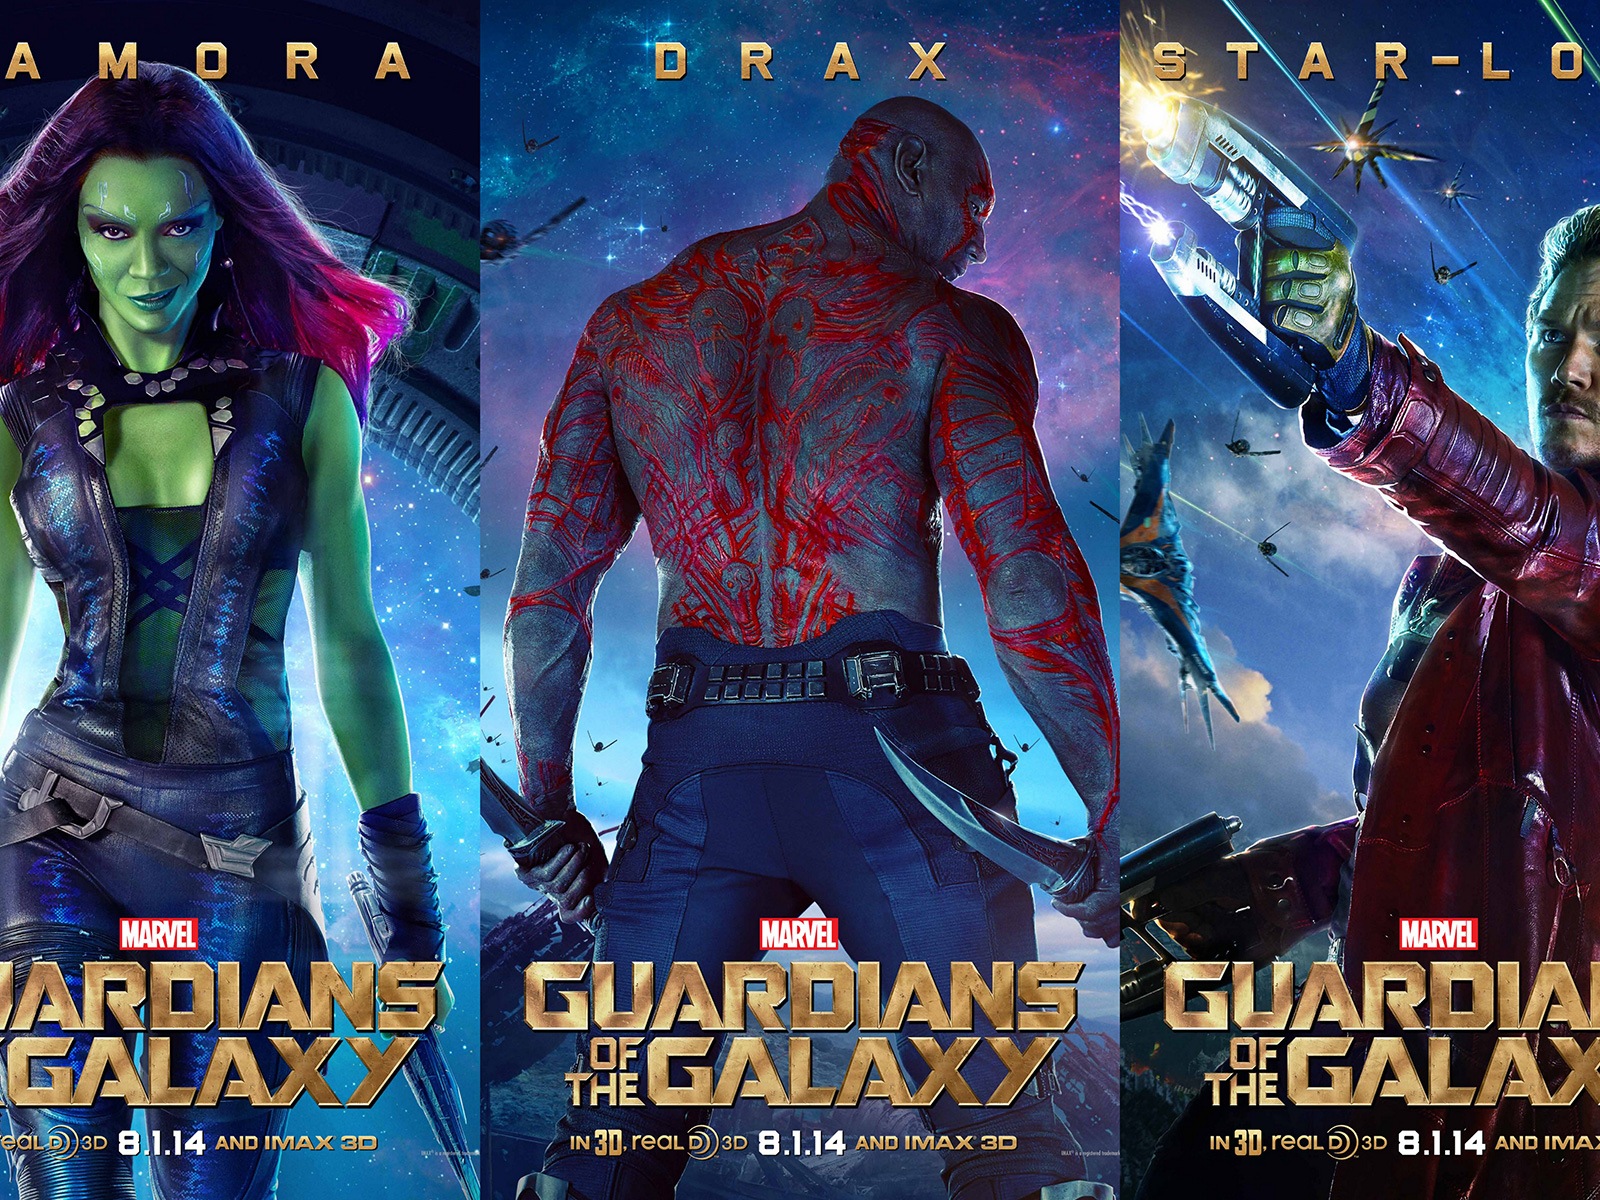 Guardians of the Galaxy 2014 HD movie wallpapers #12 - 1600x1200